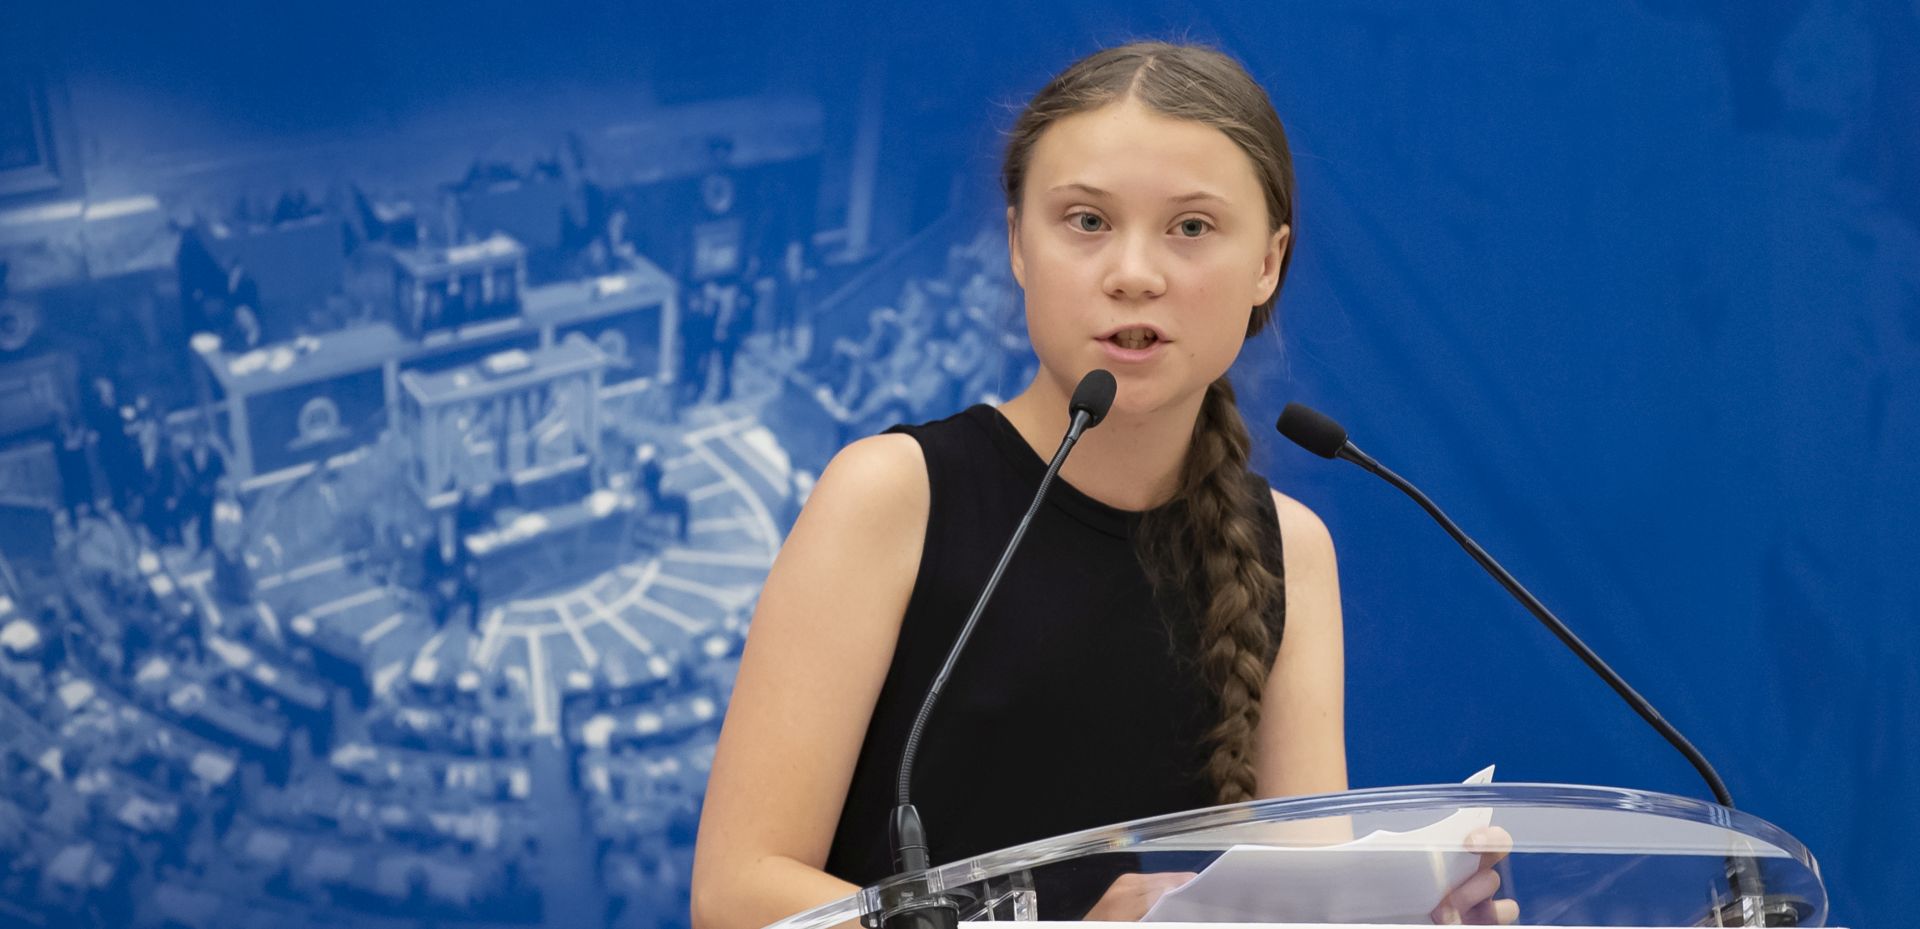 epa07735306 Swedish climate activist Greta Thunberg delivers a speech at the Assemblee Nationale, French parliament, in Paris, France, 23 July 2019. Teenage climate activist Greta Thunberg, who sparked the #FridaysForFuture school strike movement, attended a conference with young climate activists at the National Assembly.  EPA/IAN LANGSDON